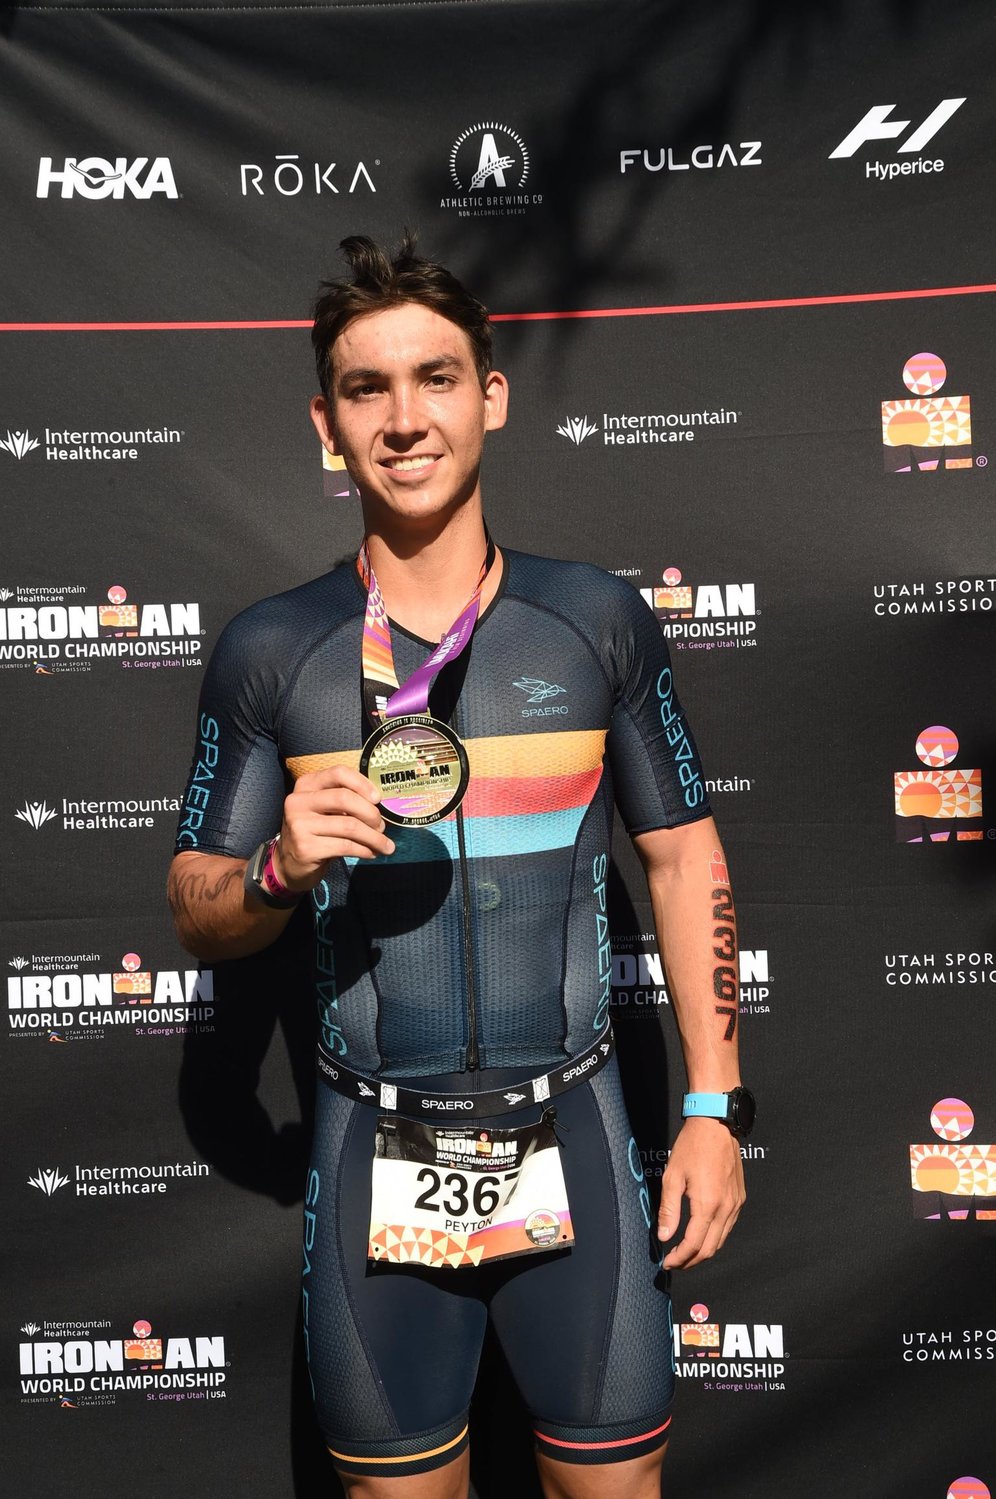 Peyton Thompson holds up his medal for winning fourth place at the 2021 Ironman World Championship in St. George, Utah.